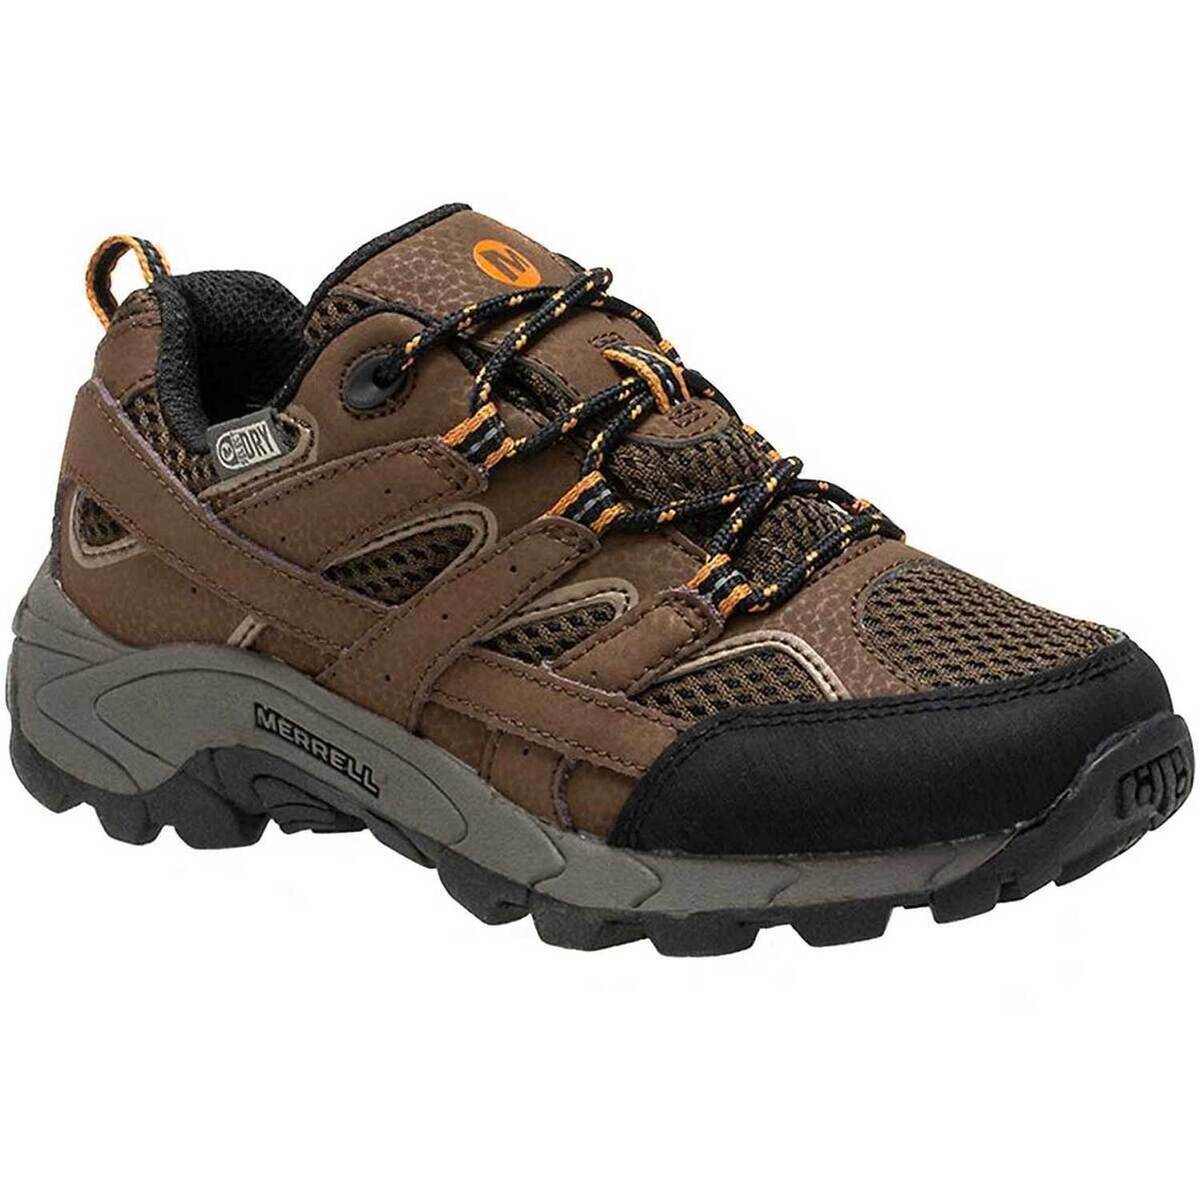 Merrell Youth Moab 2 Waterproof Low Hiking Shoes | Sportsman's Warehouse